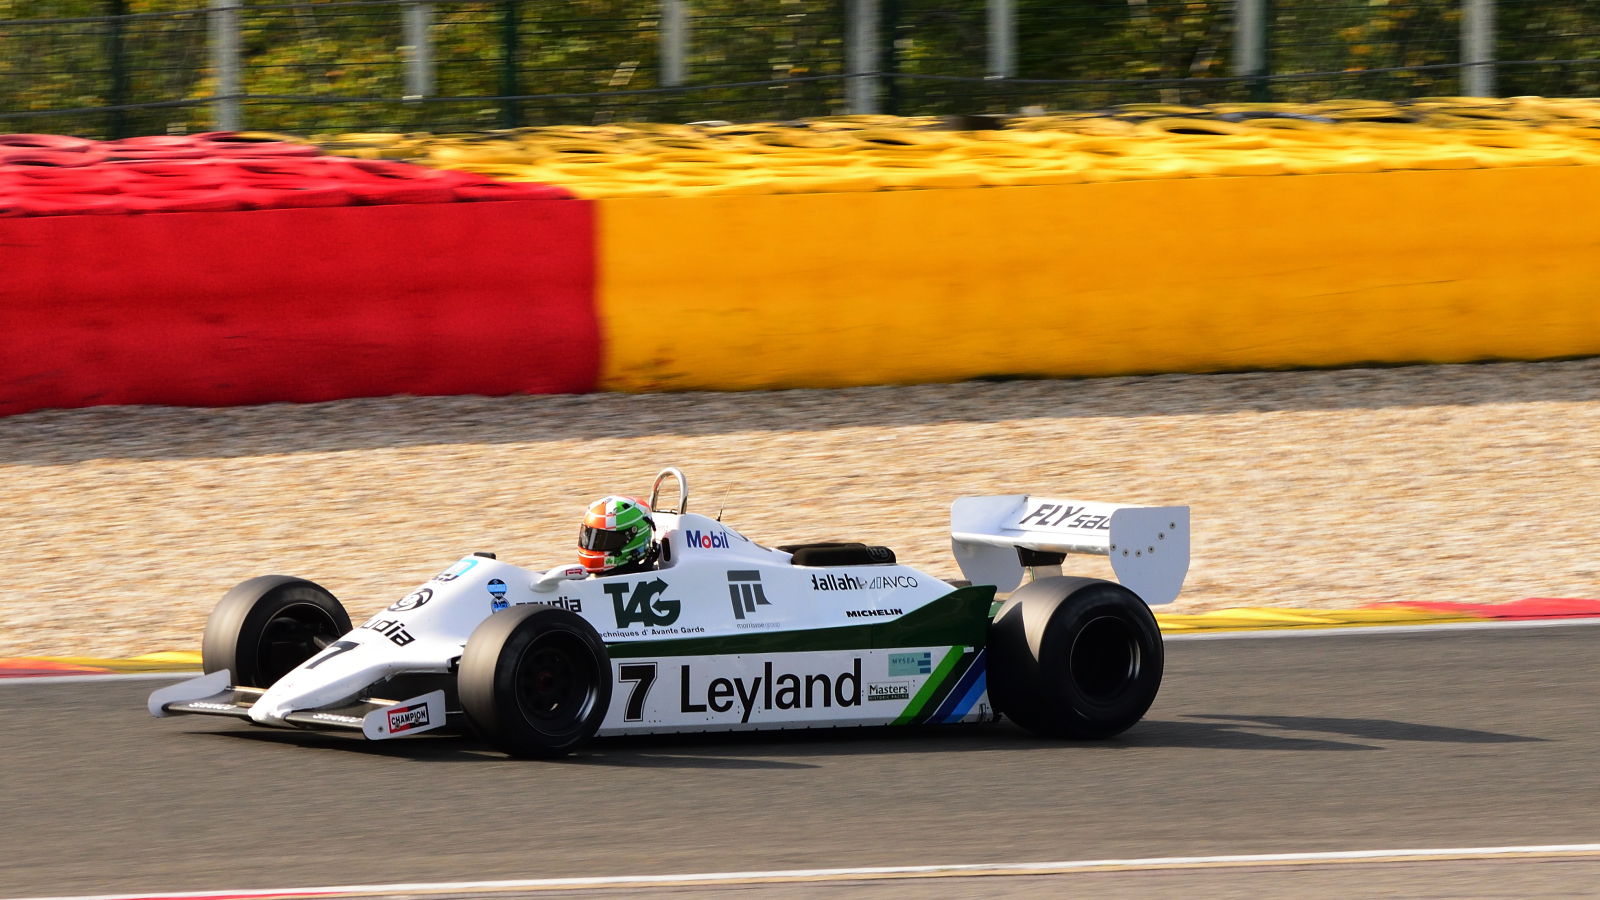 F1 WILLIAMS FW07C (1982), Fahrer: CANTILLON Mike (GBR). Hier beim 6h Classic Rennen am 30.09.2023 Rahmenprogramm MASTERS RACING LEGENDS ~ F1 CARS 1966-1985in Spa Francorchamps